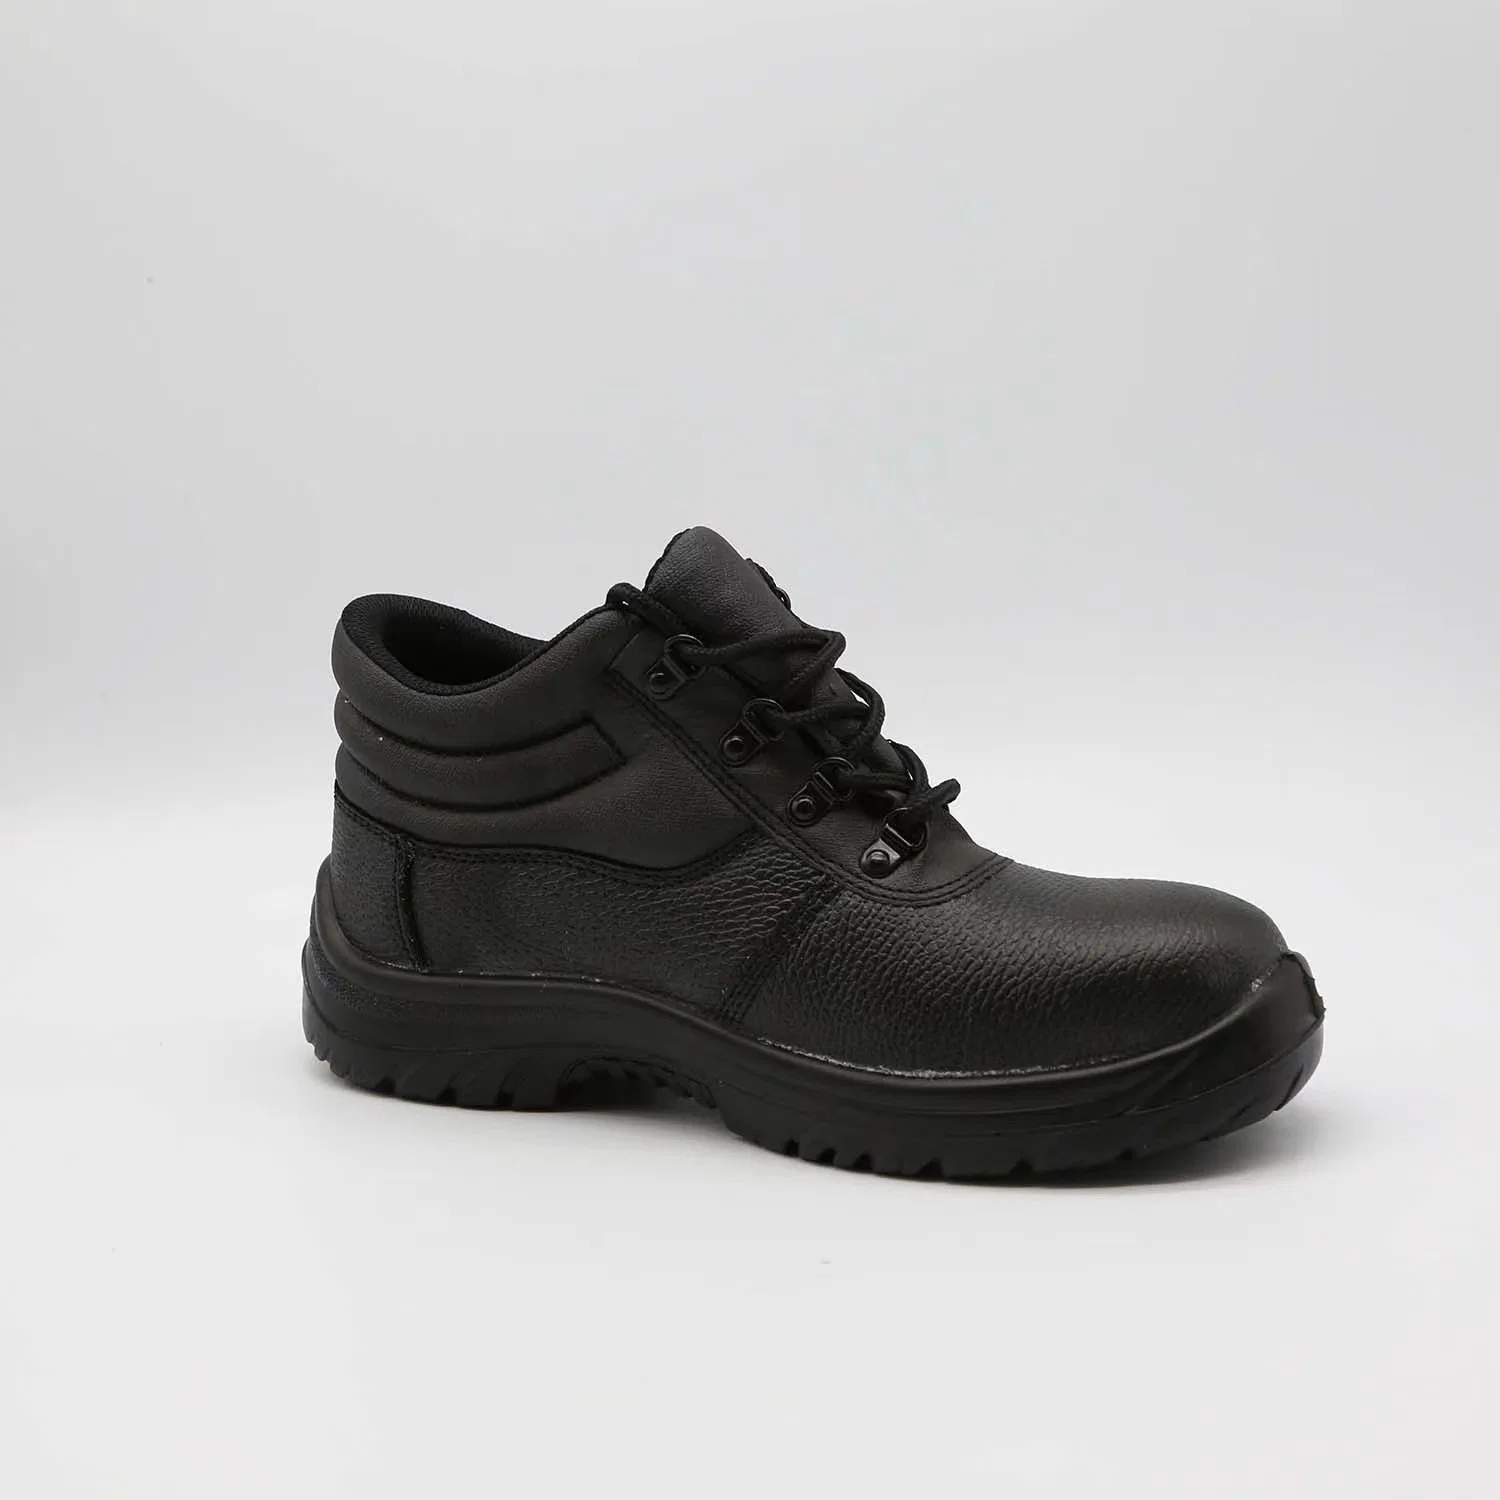 Leather Shoes Work Shoes Safety Footwear Shoes